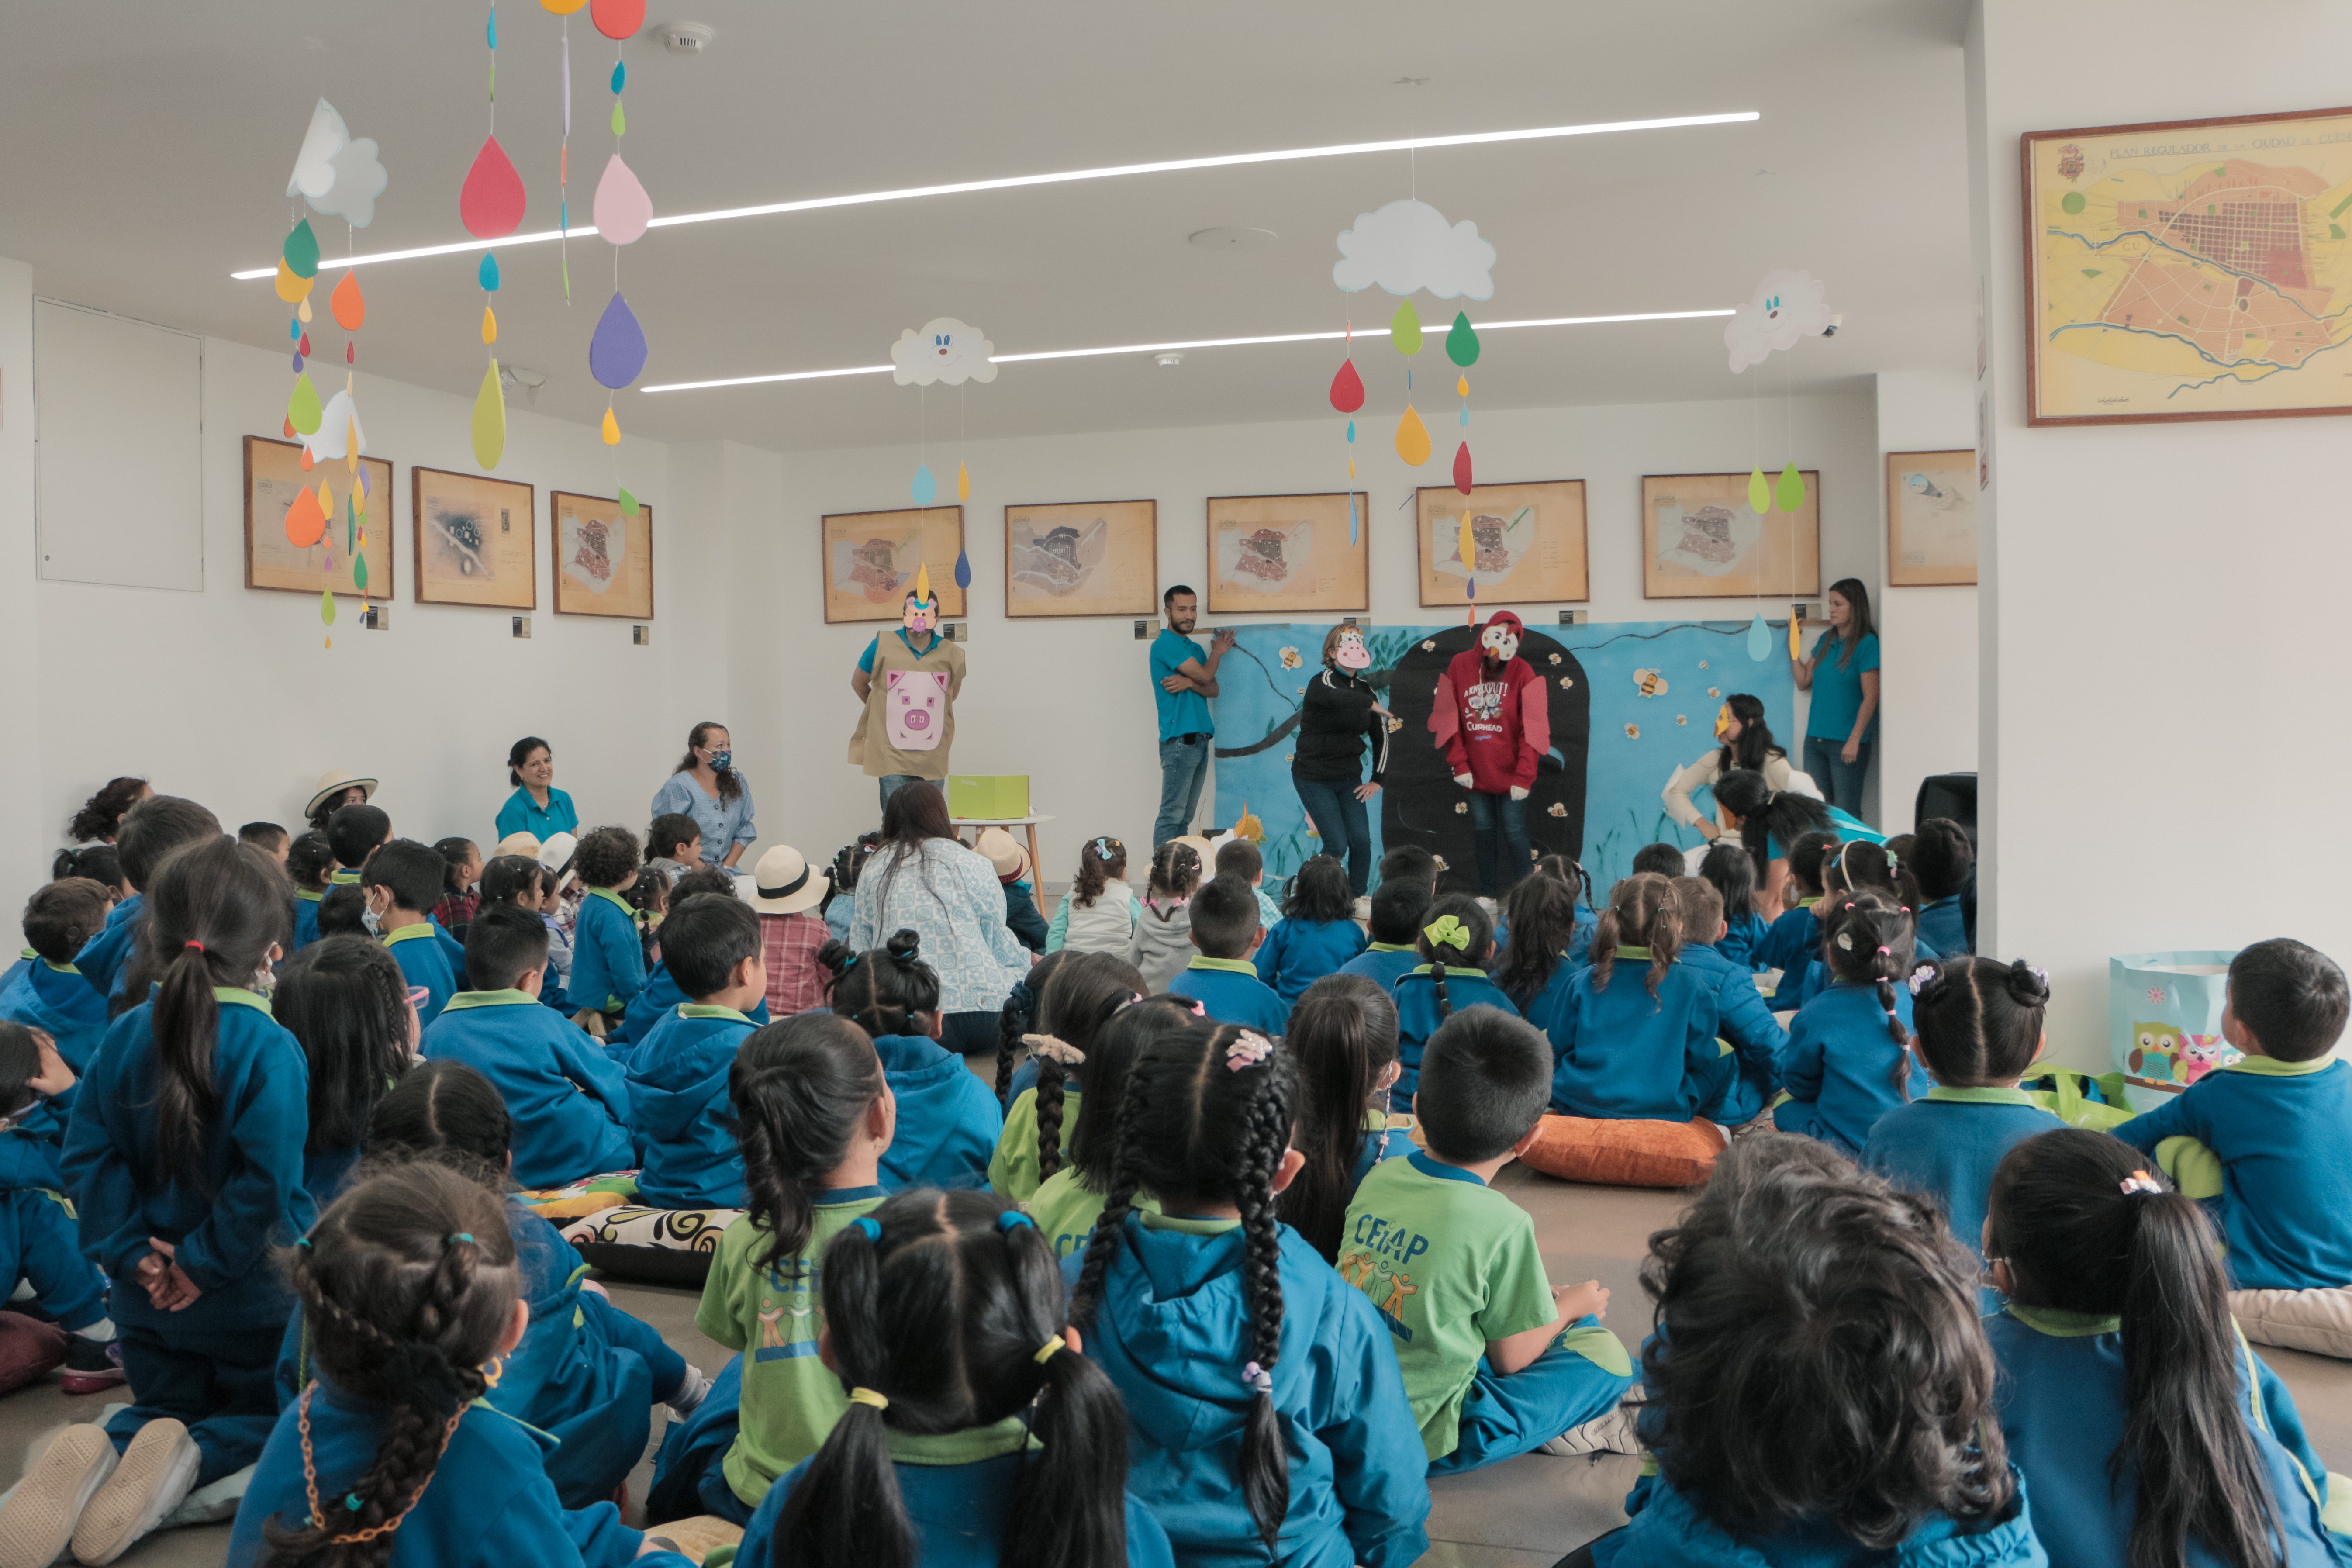 The CEIAP celebrated Reading Day at the University of Azuay